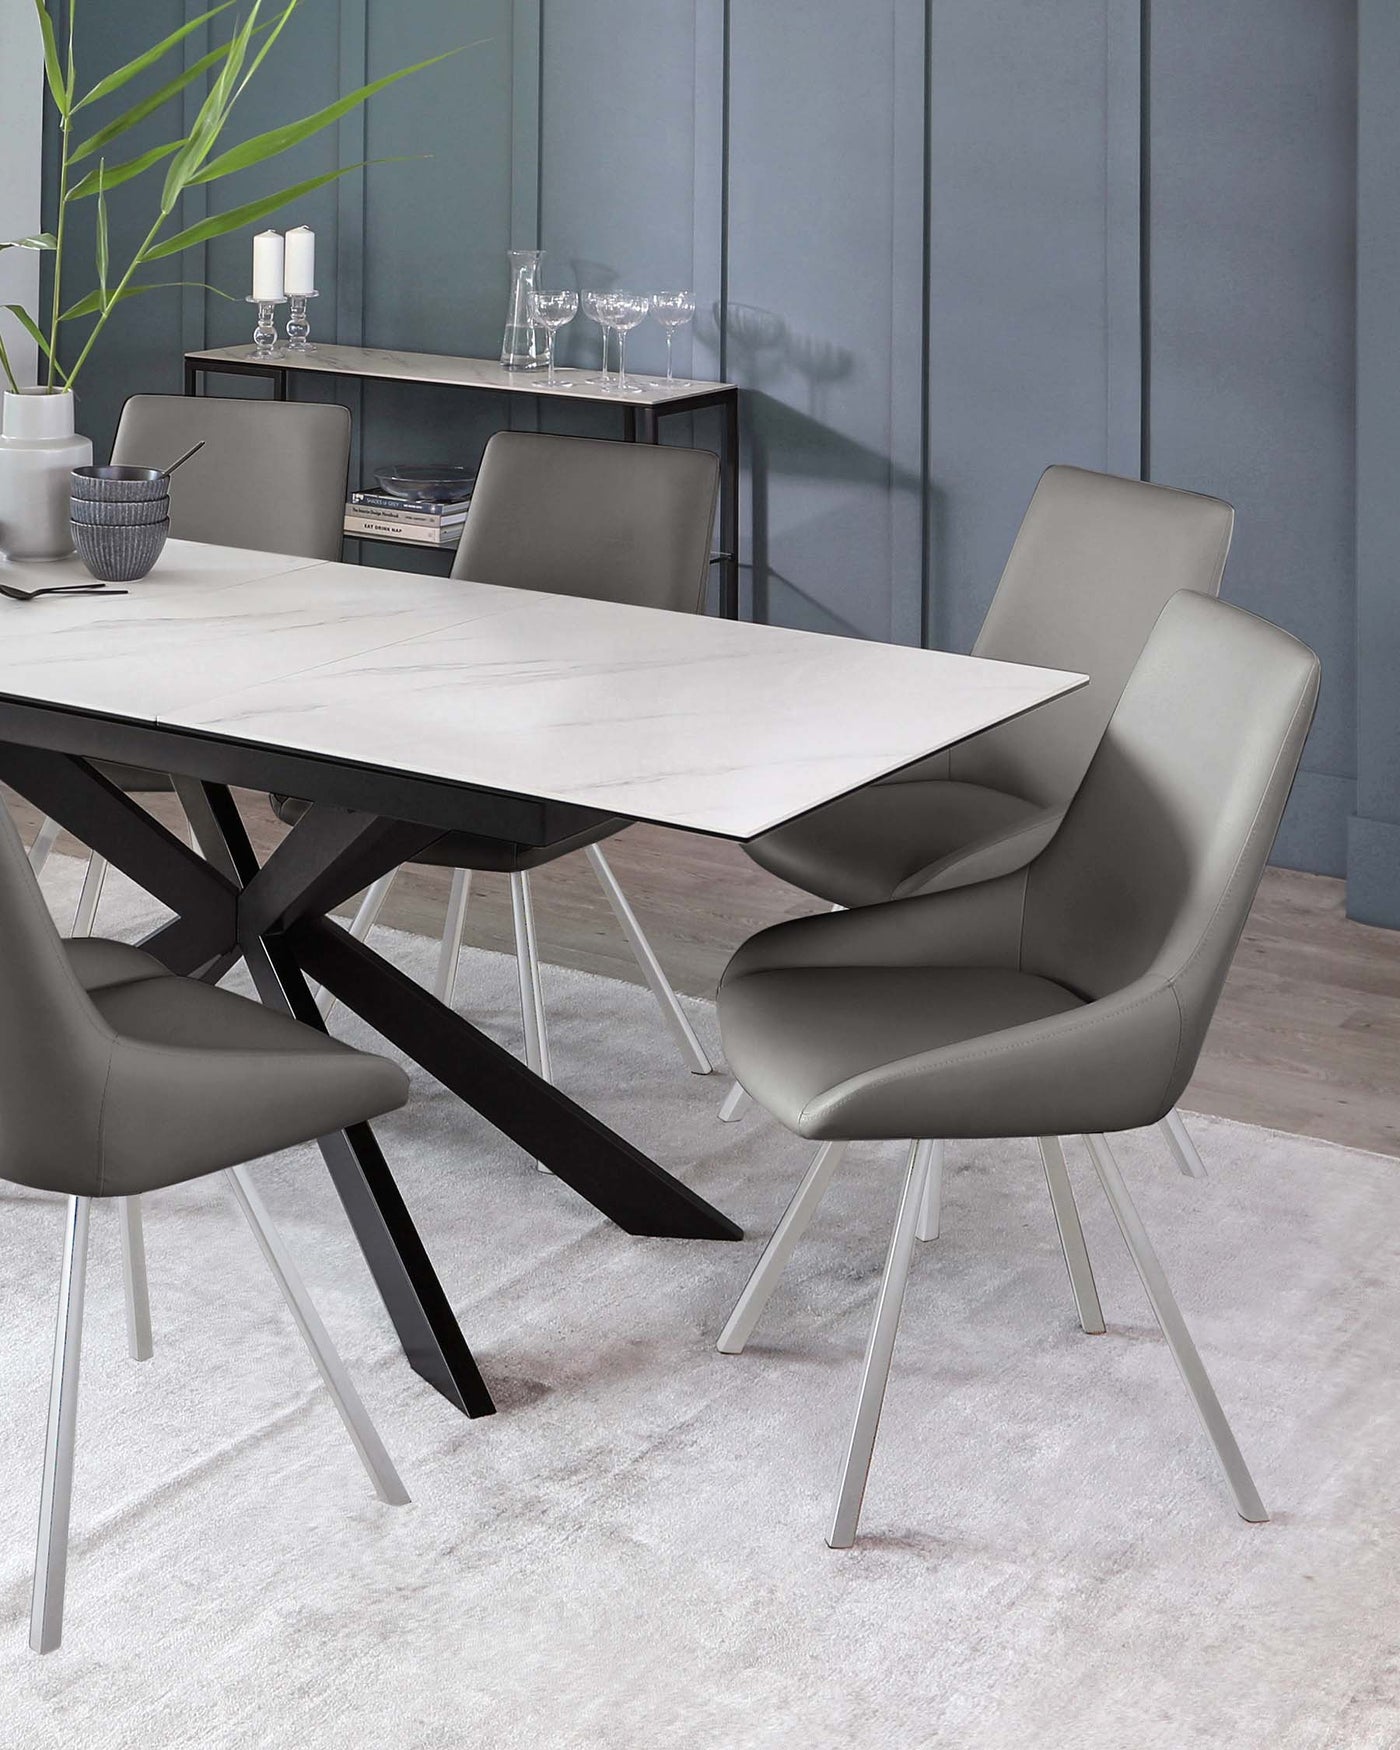 Modern dining room furniture featuring a rectangular table with a white marble top and an angular black base, paired with four sleek grey upholstered chairs with metal legs. A minimalist style sideboard with a dark finish is in the background, accessorized with simple decor.